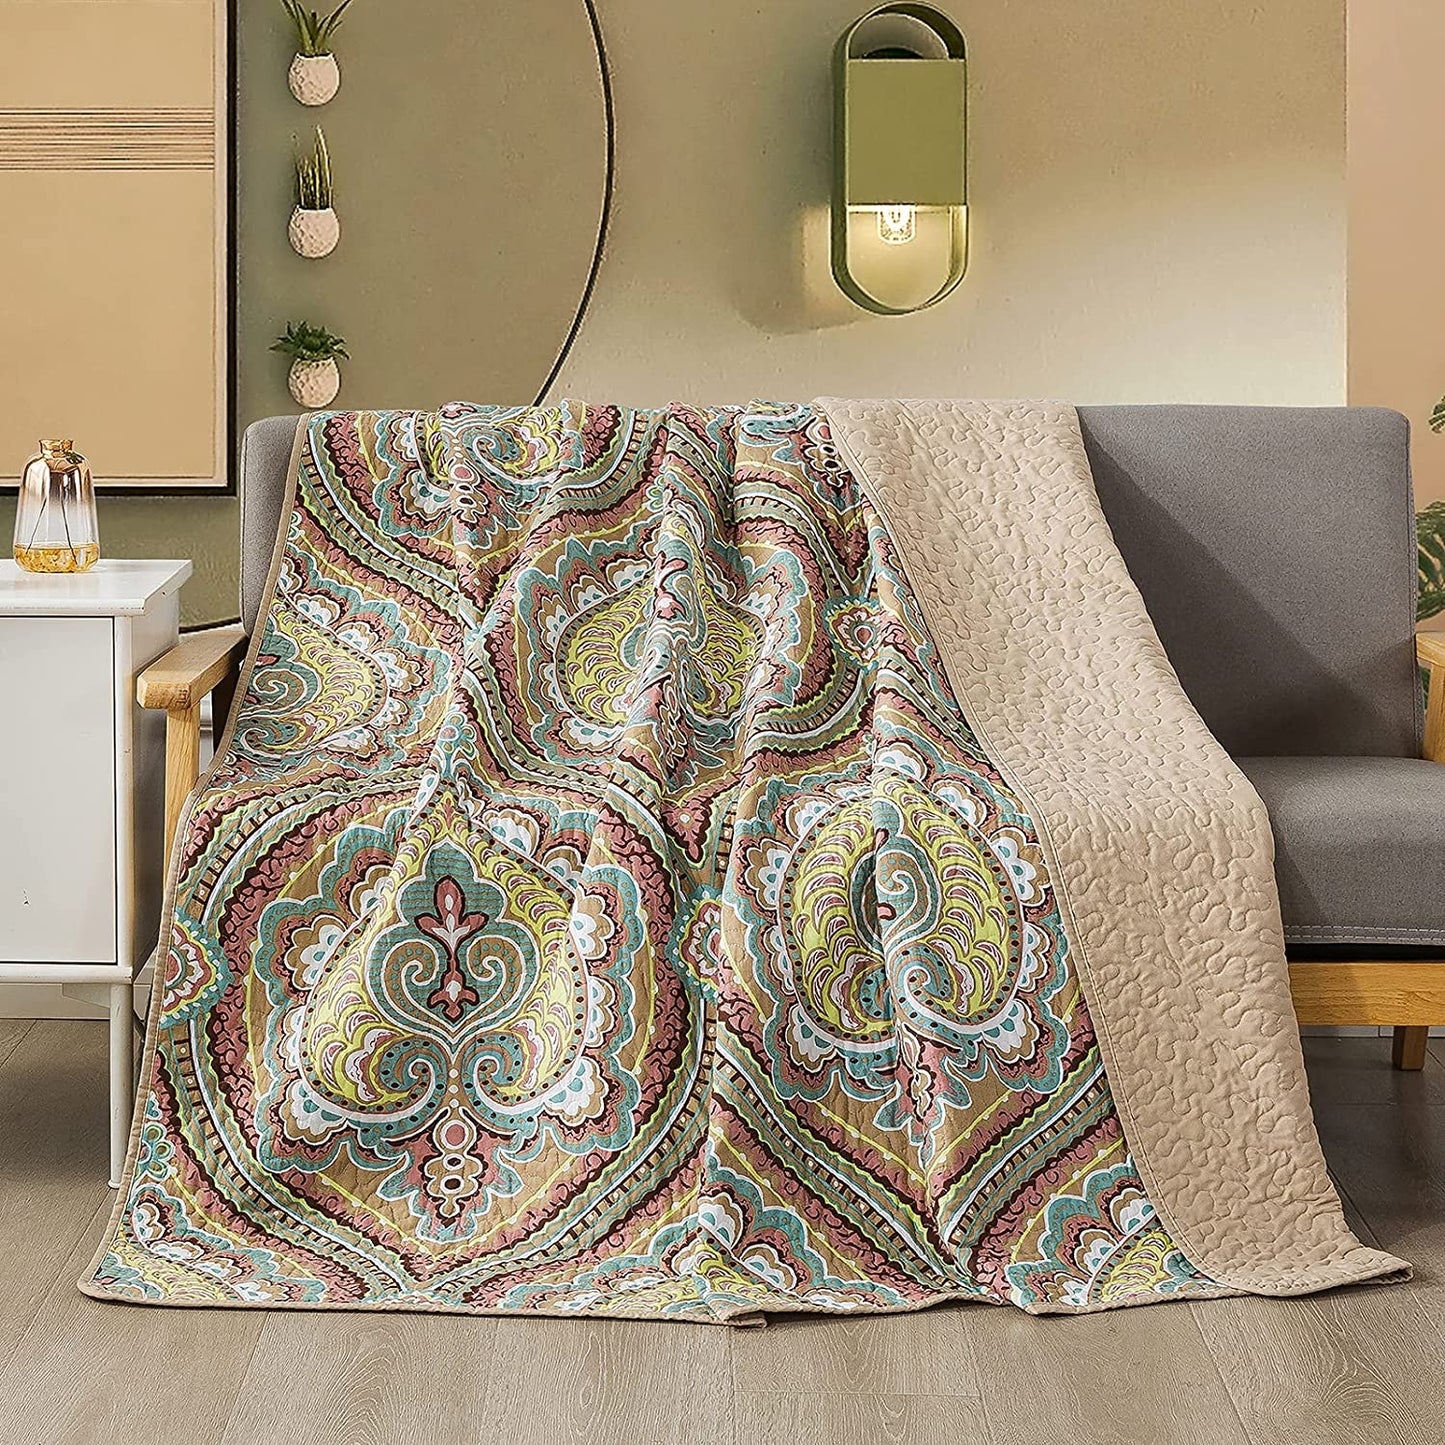 Quilted Throw Blanket for Bed Couch Sofa, European Paisley Blossom